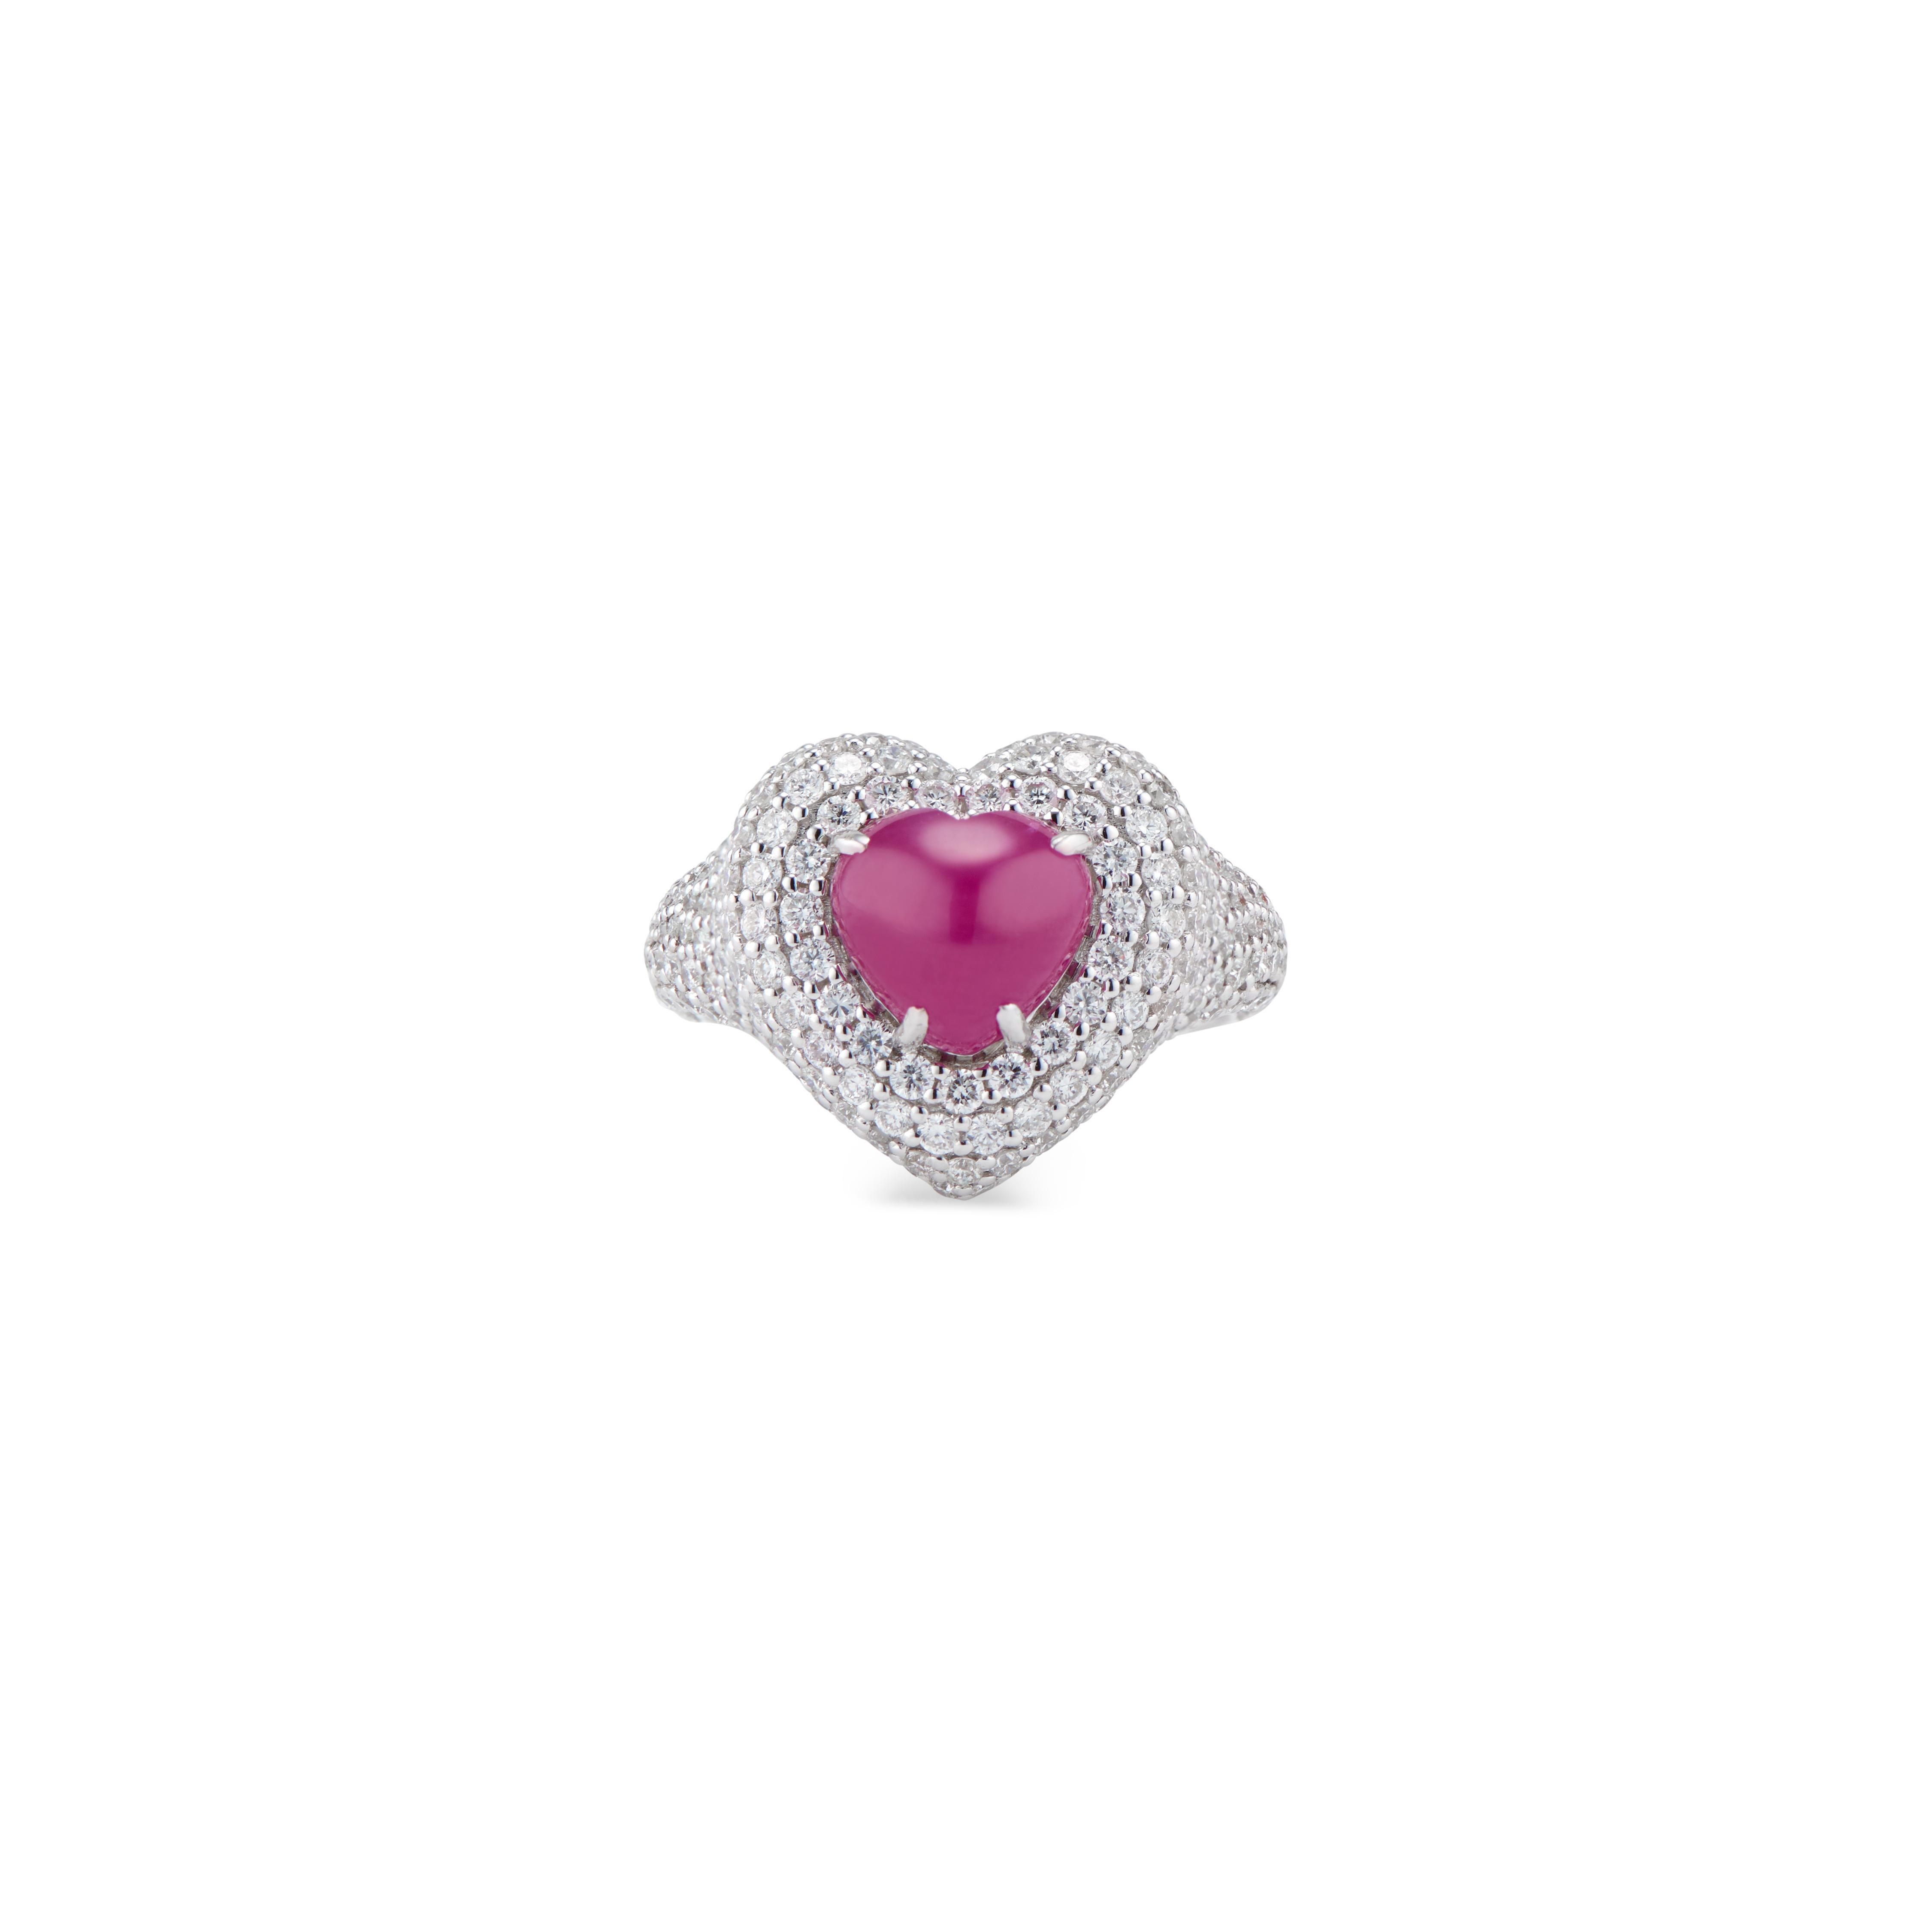 Appearing to float along a strand of diamonds, a vivid pink, heart-shaped ruby makes an impactful impression in Ri Noor’s Floating Ruby Heart and Diamond Necklace. Round diamonds increase in size towards the central element of the necklace, creating